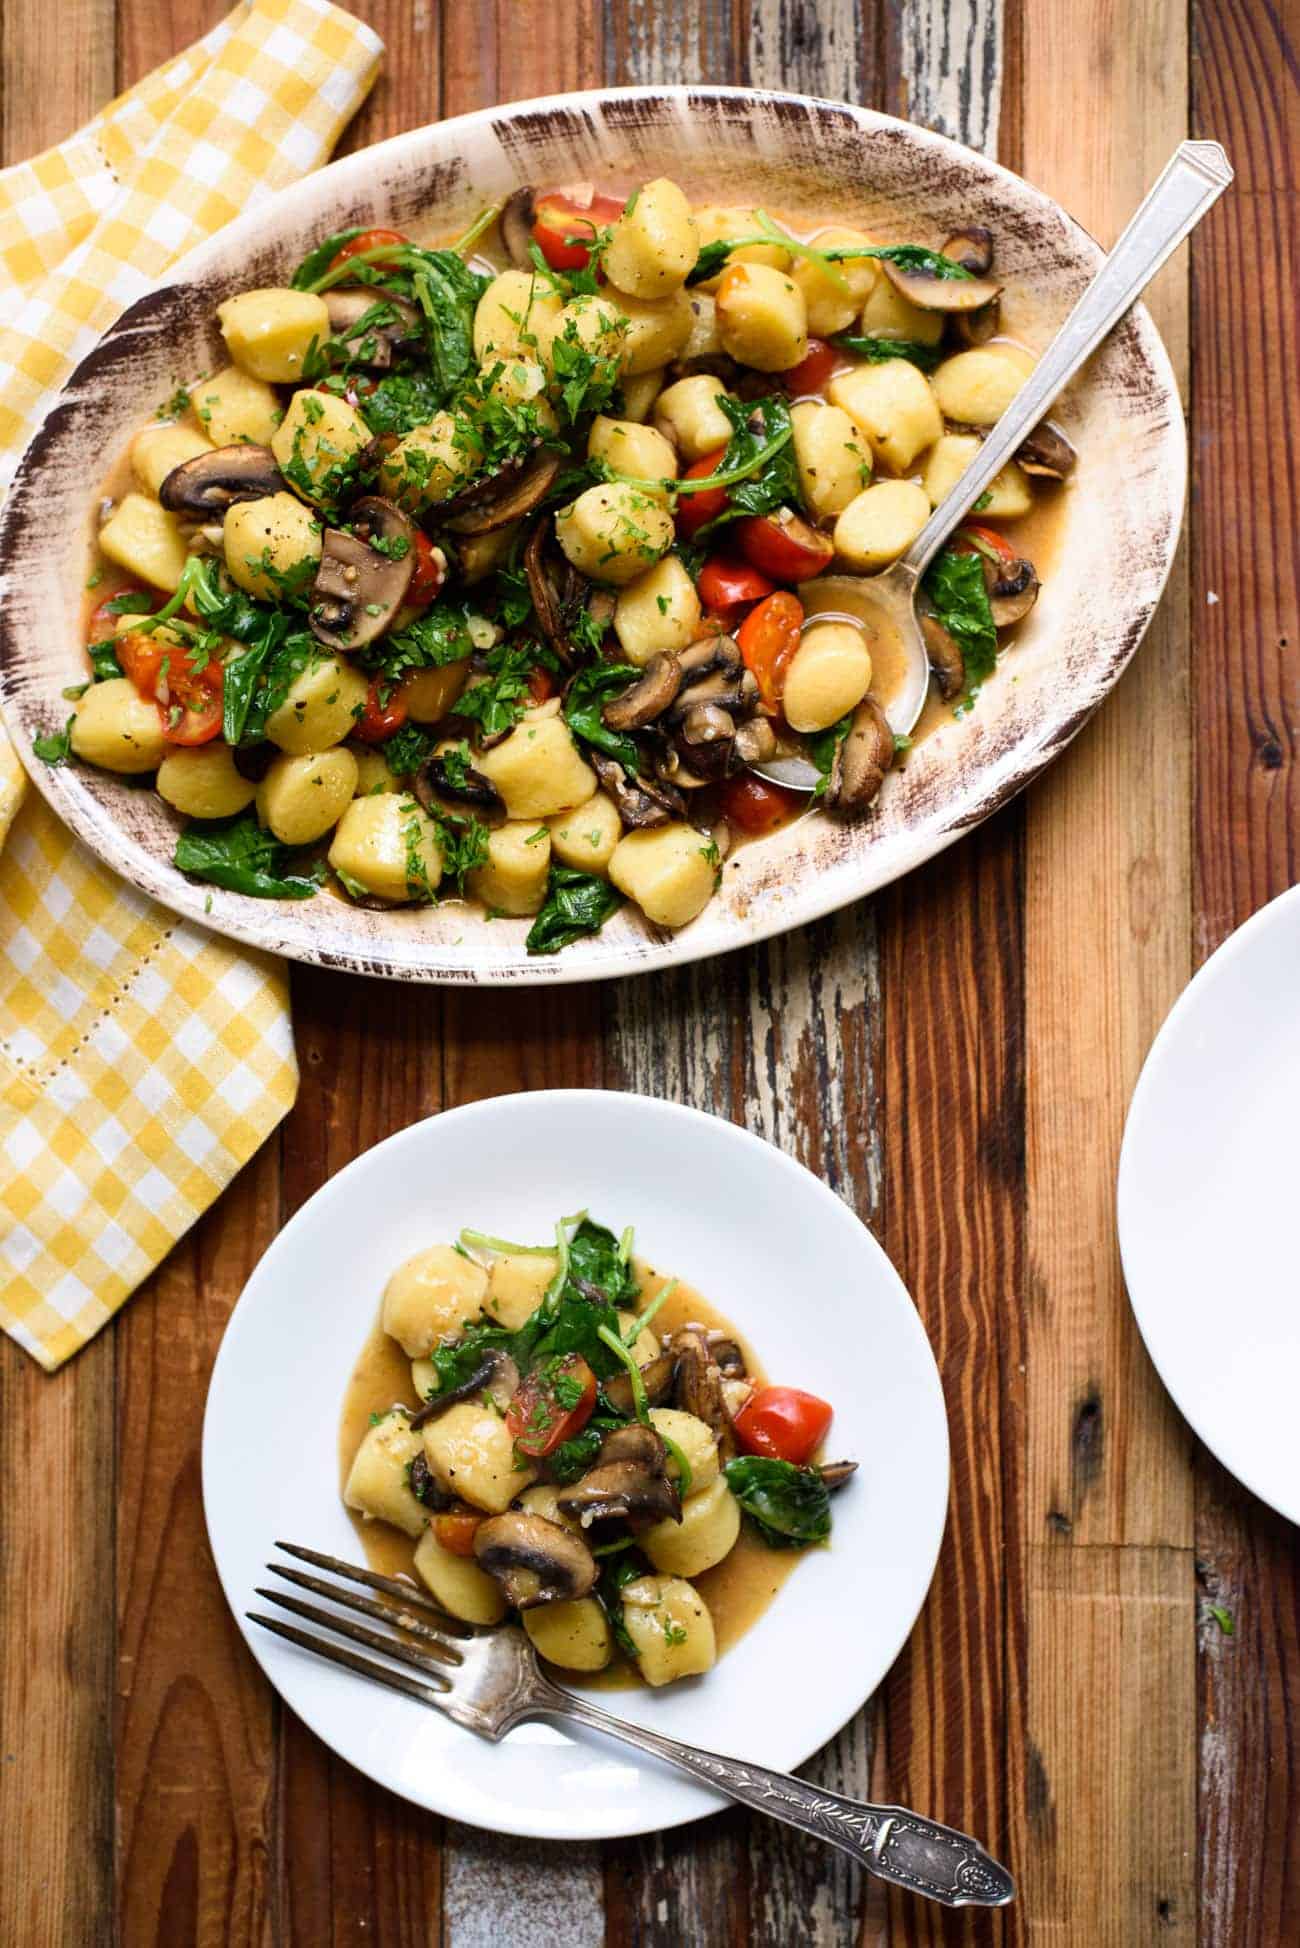 Ready-made pre-packaged gnocchi on plates, served in a sauce with mushrooms and tomatoes.